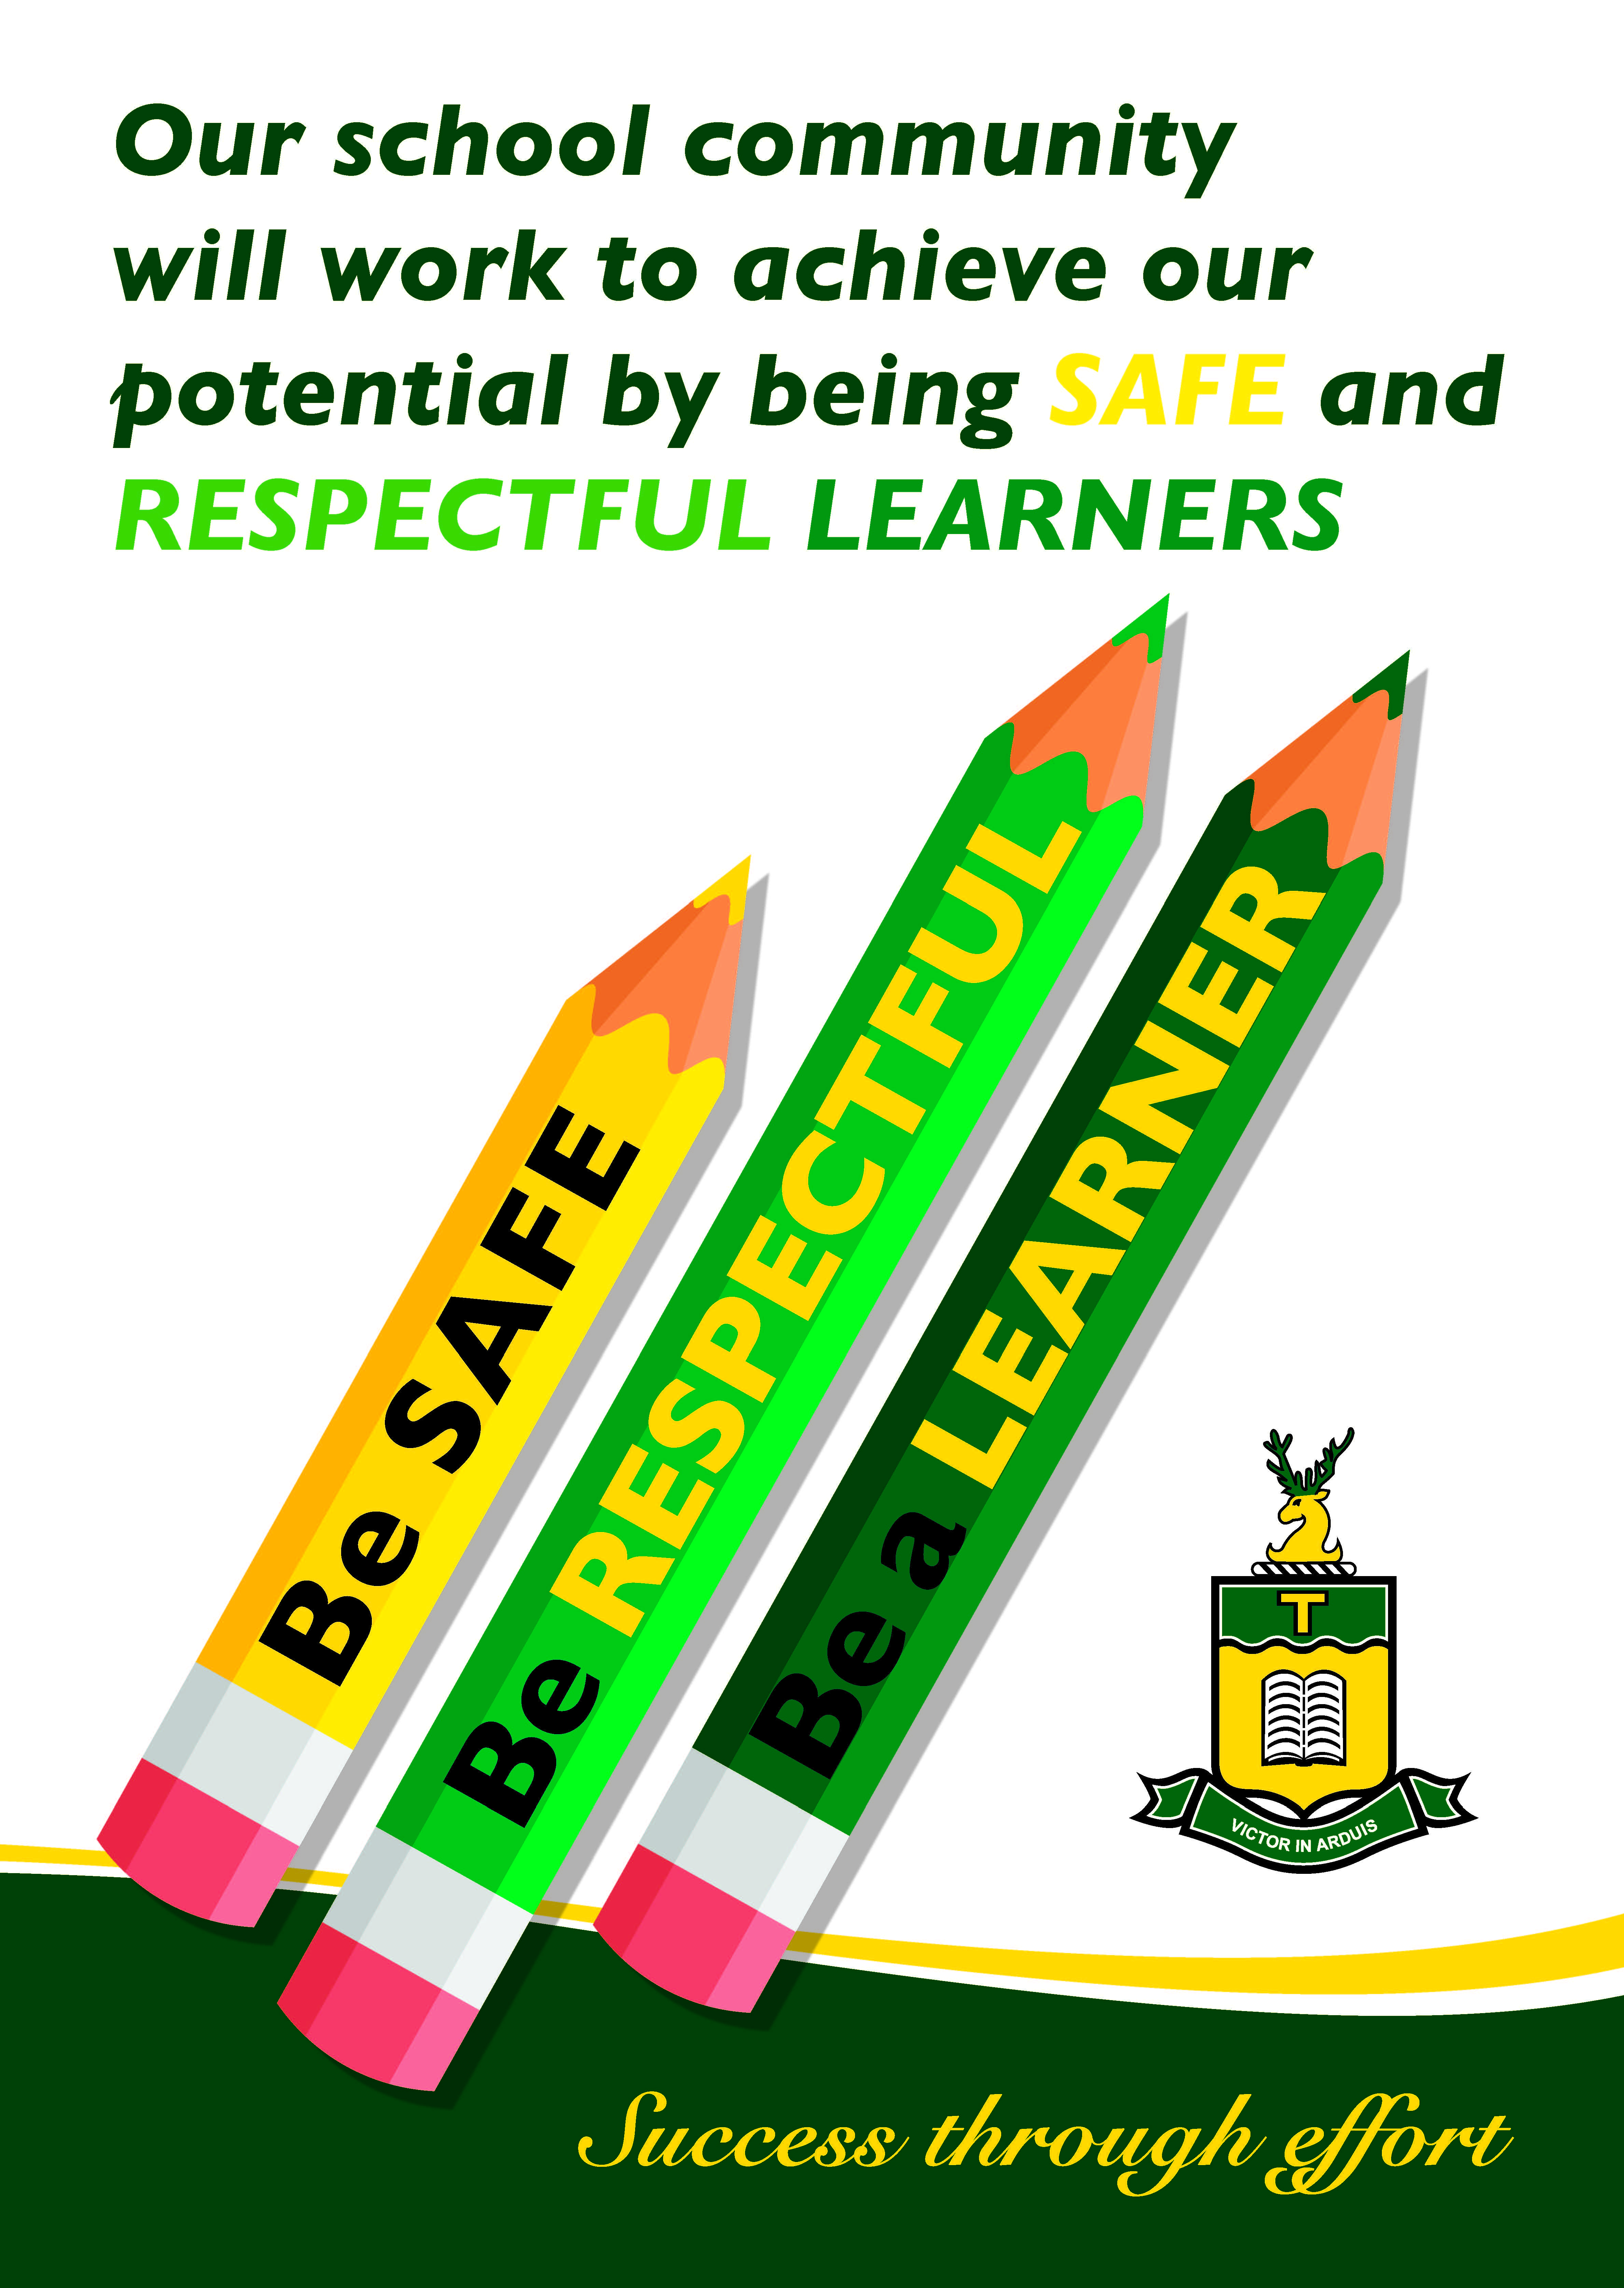 Our school community will work to achieve our potential by being safe and respectful learners